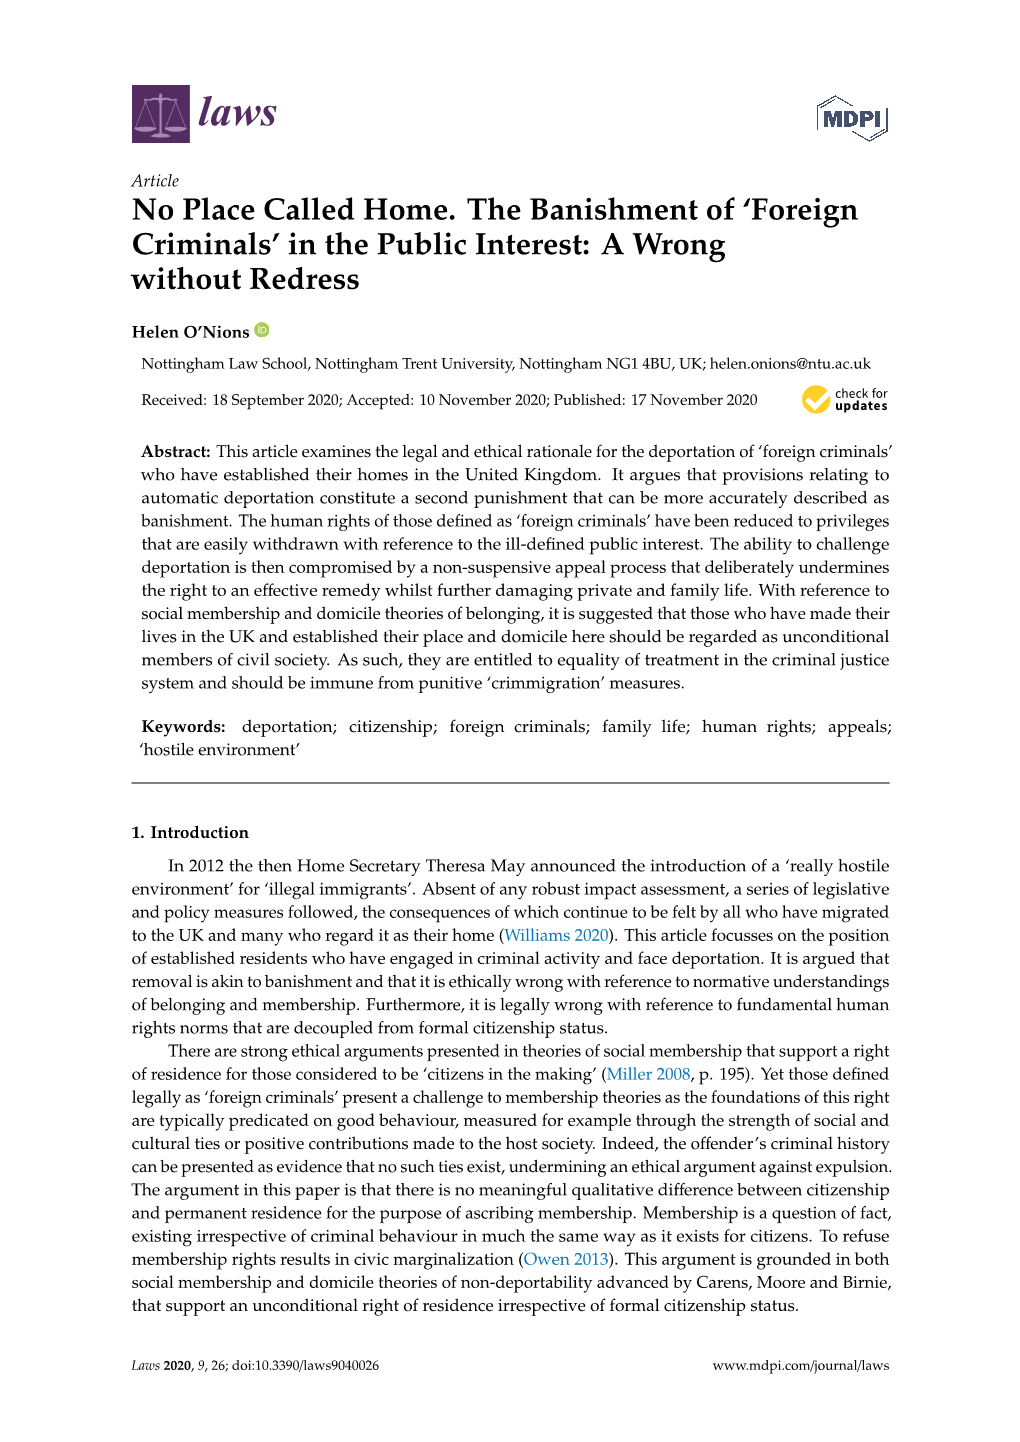 Foreign Criminals’ in the Public Interest: a Wrong Without Redress